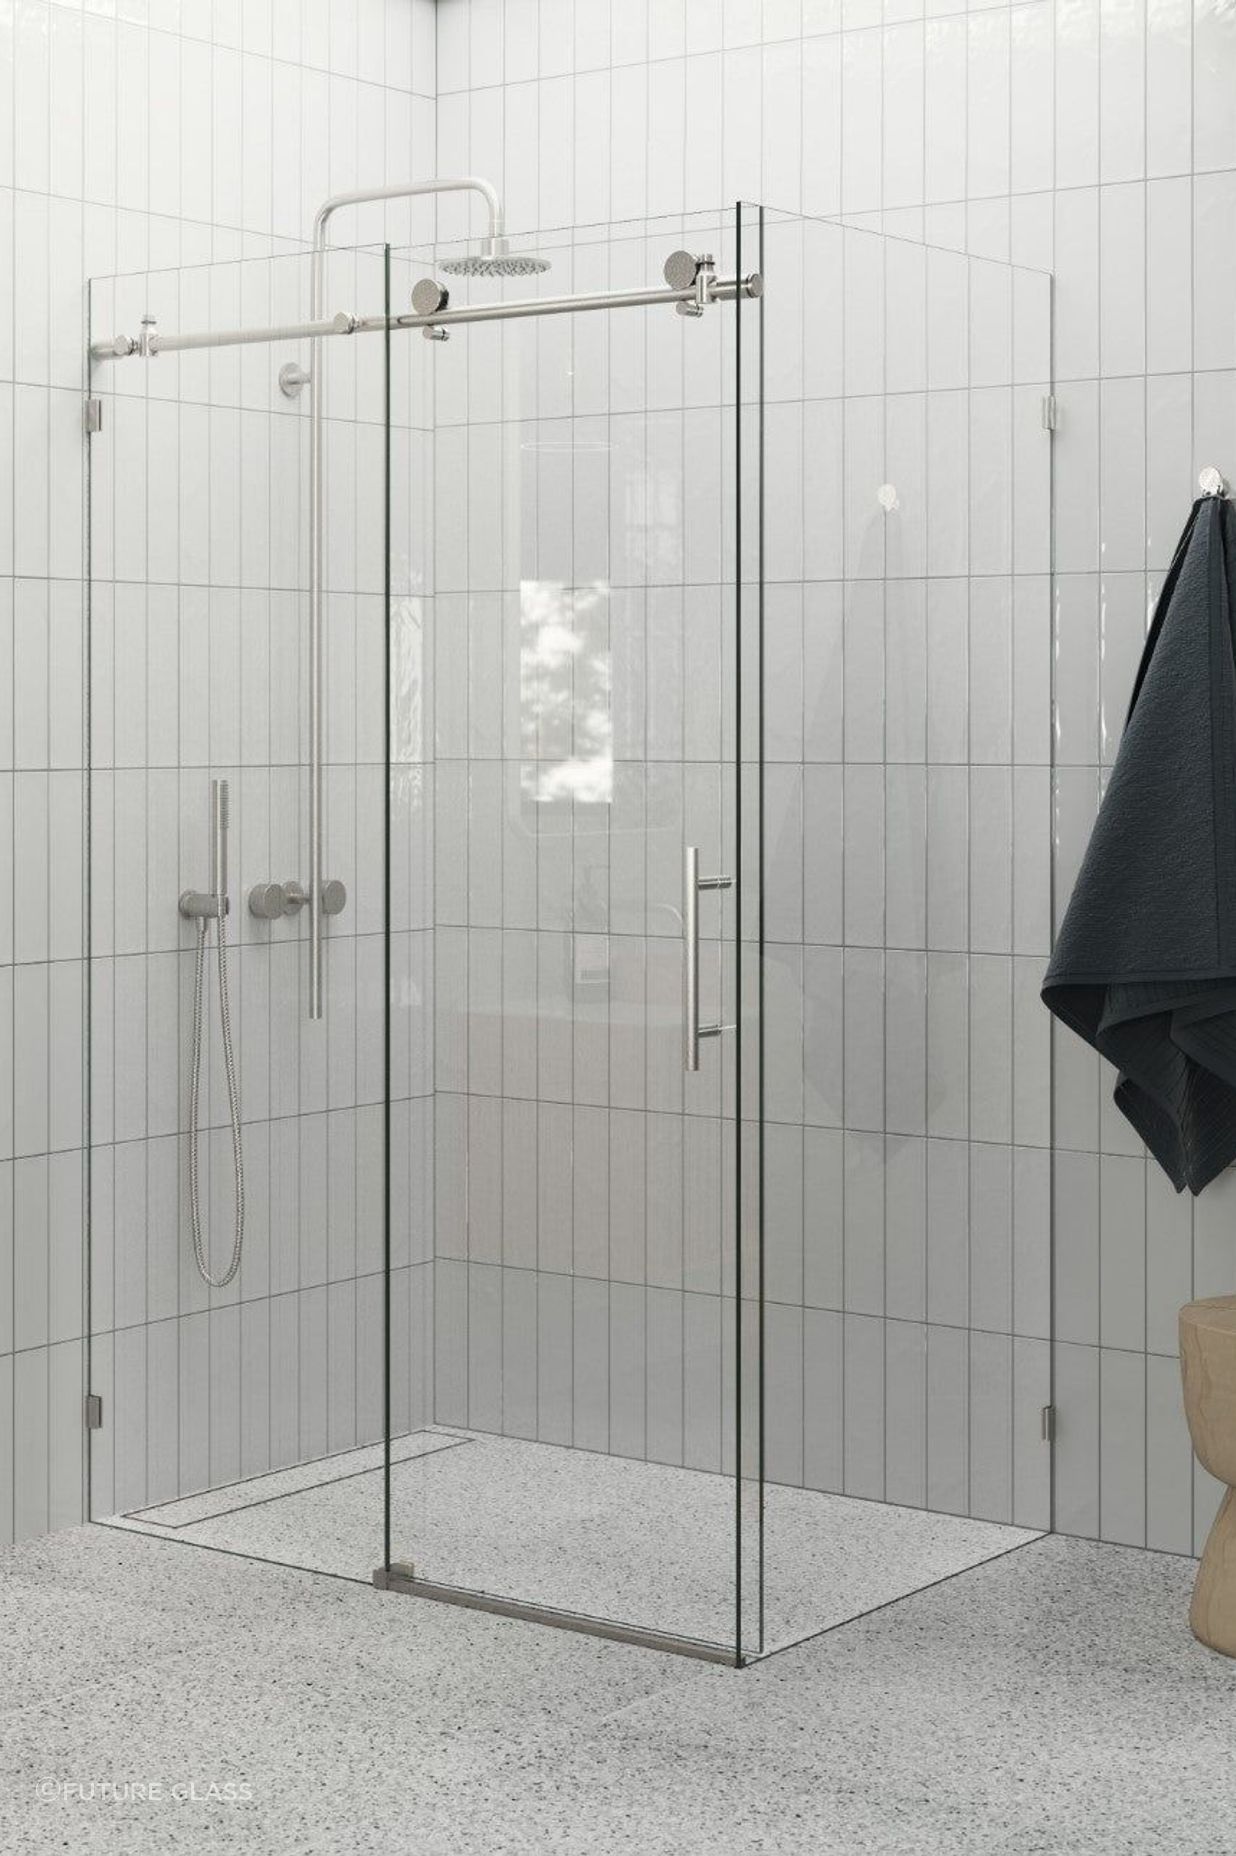 Sliding door shower screens are a popular, functional choice.